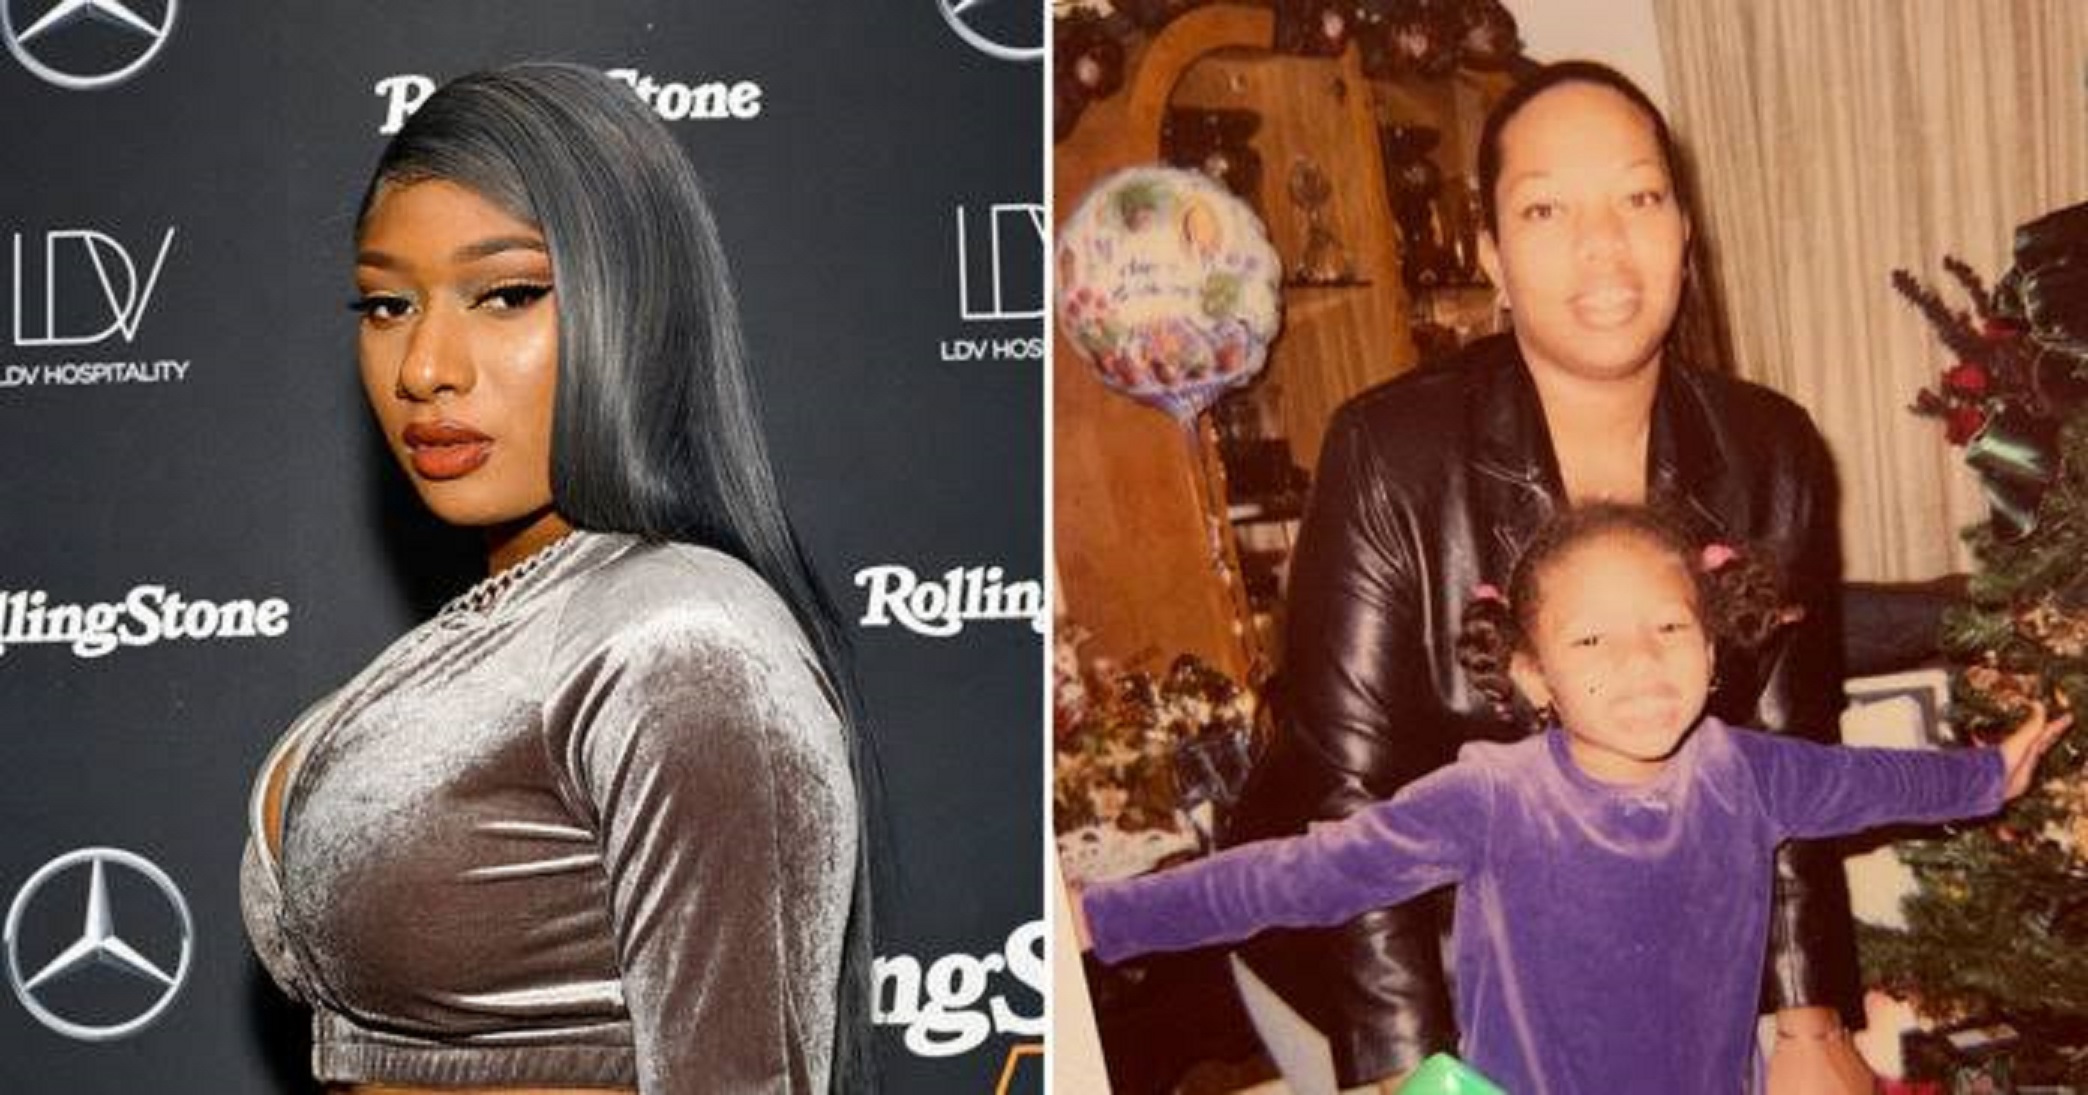 Meghan The Stallion Shares Emotional Post Mourning The Loss Of Her Mother